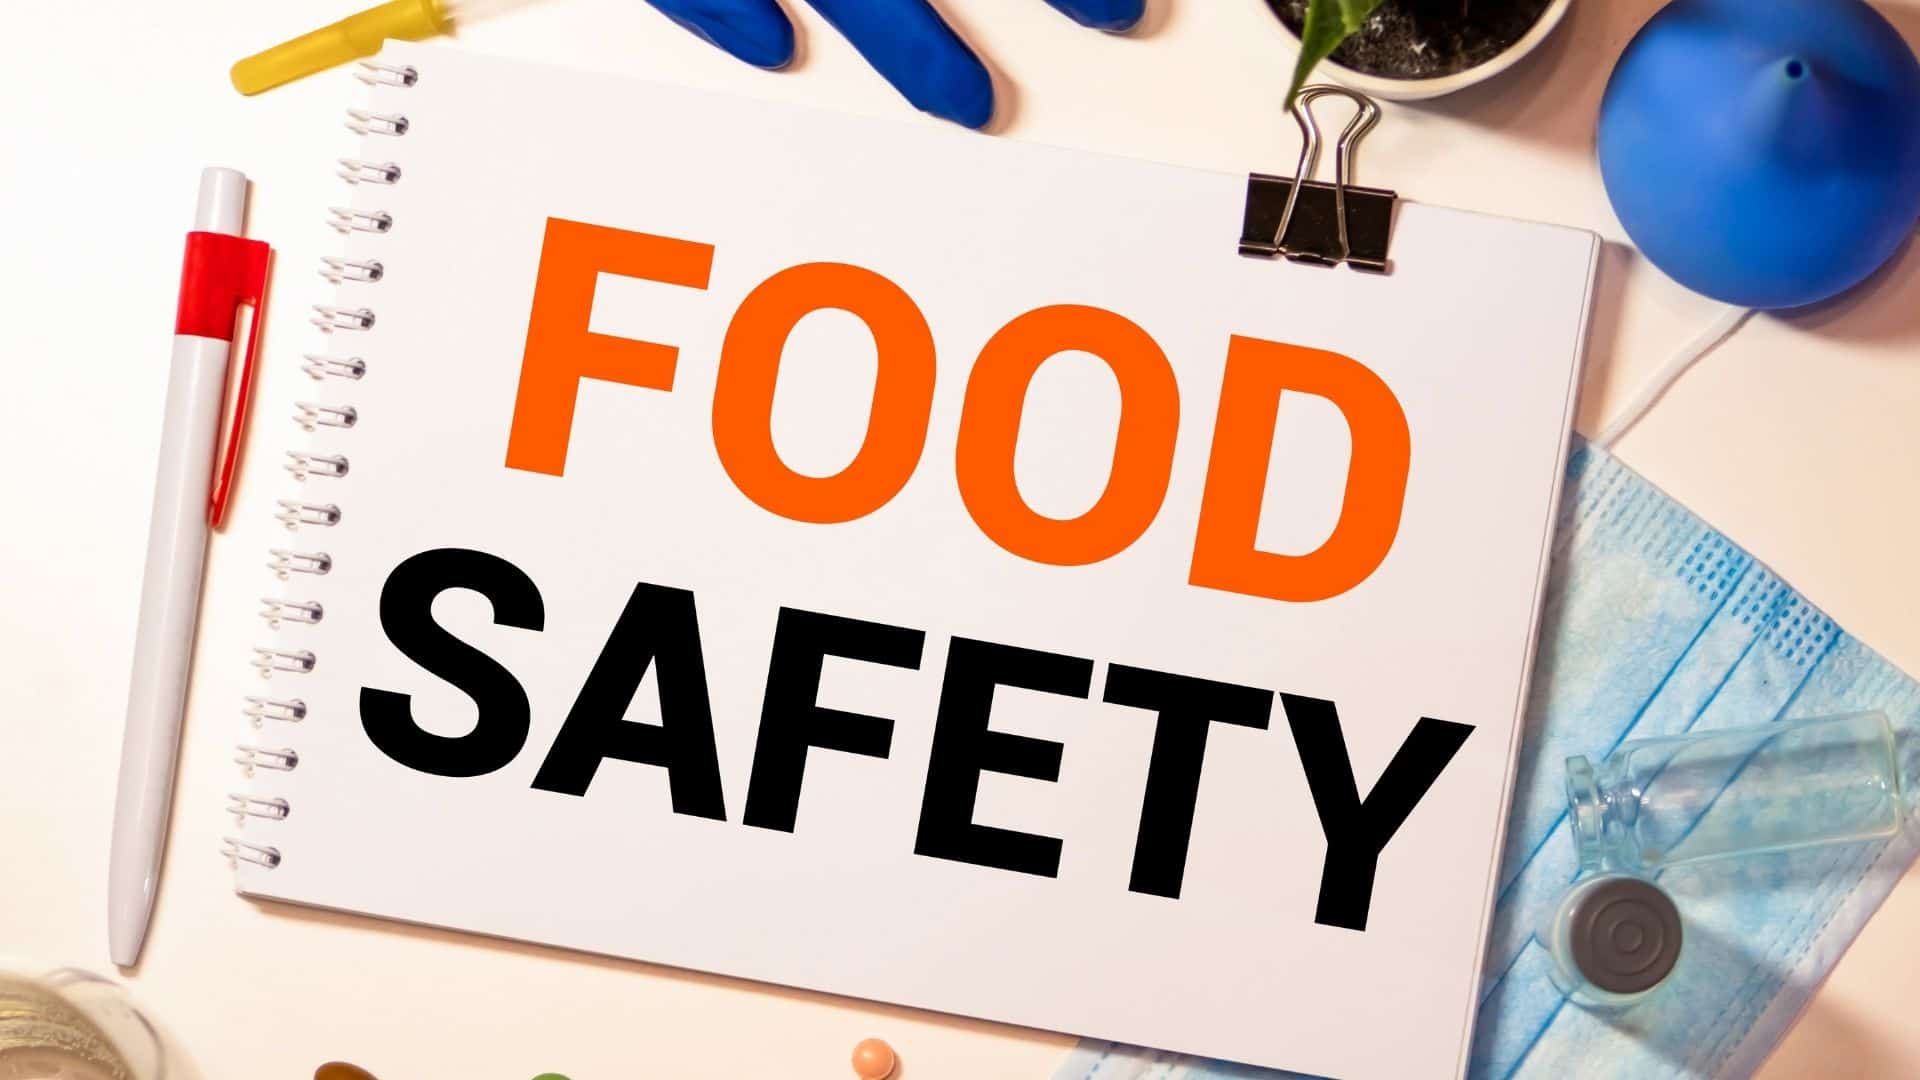 b)	Food safety is the highest priority 